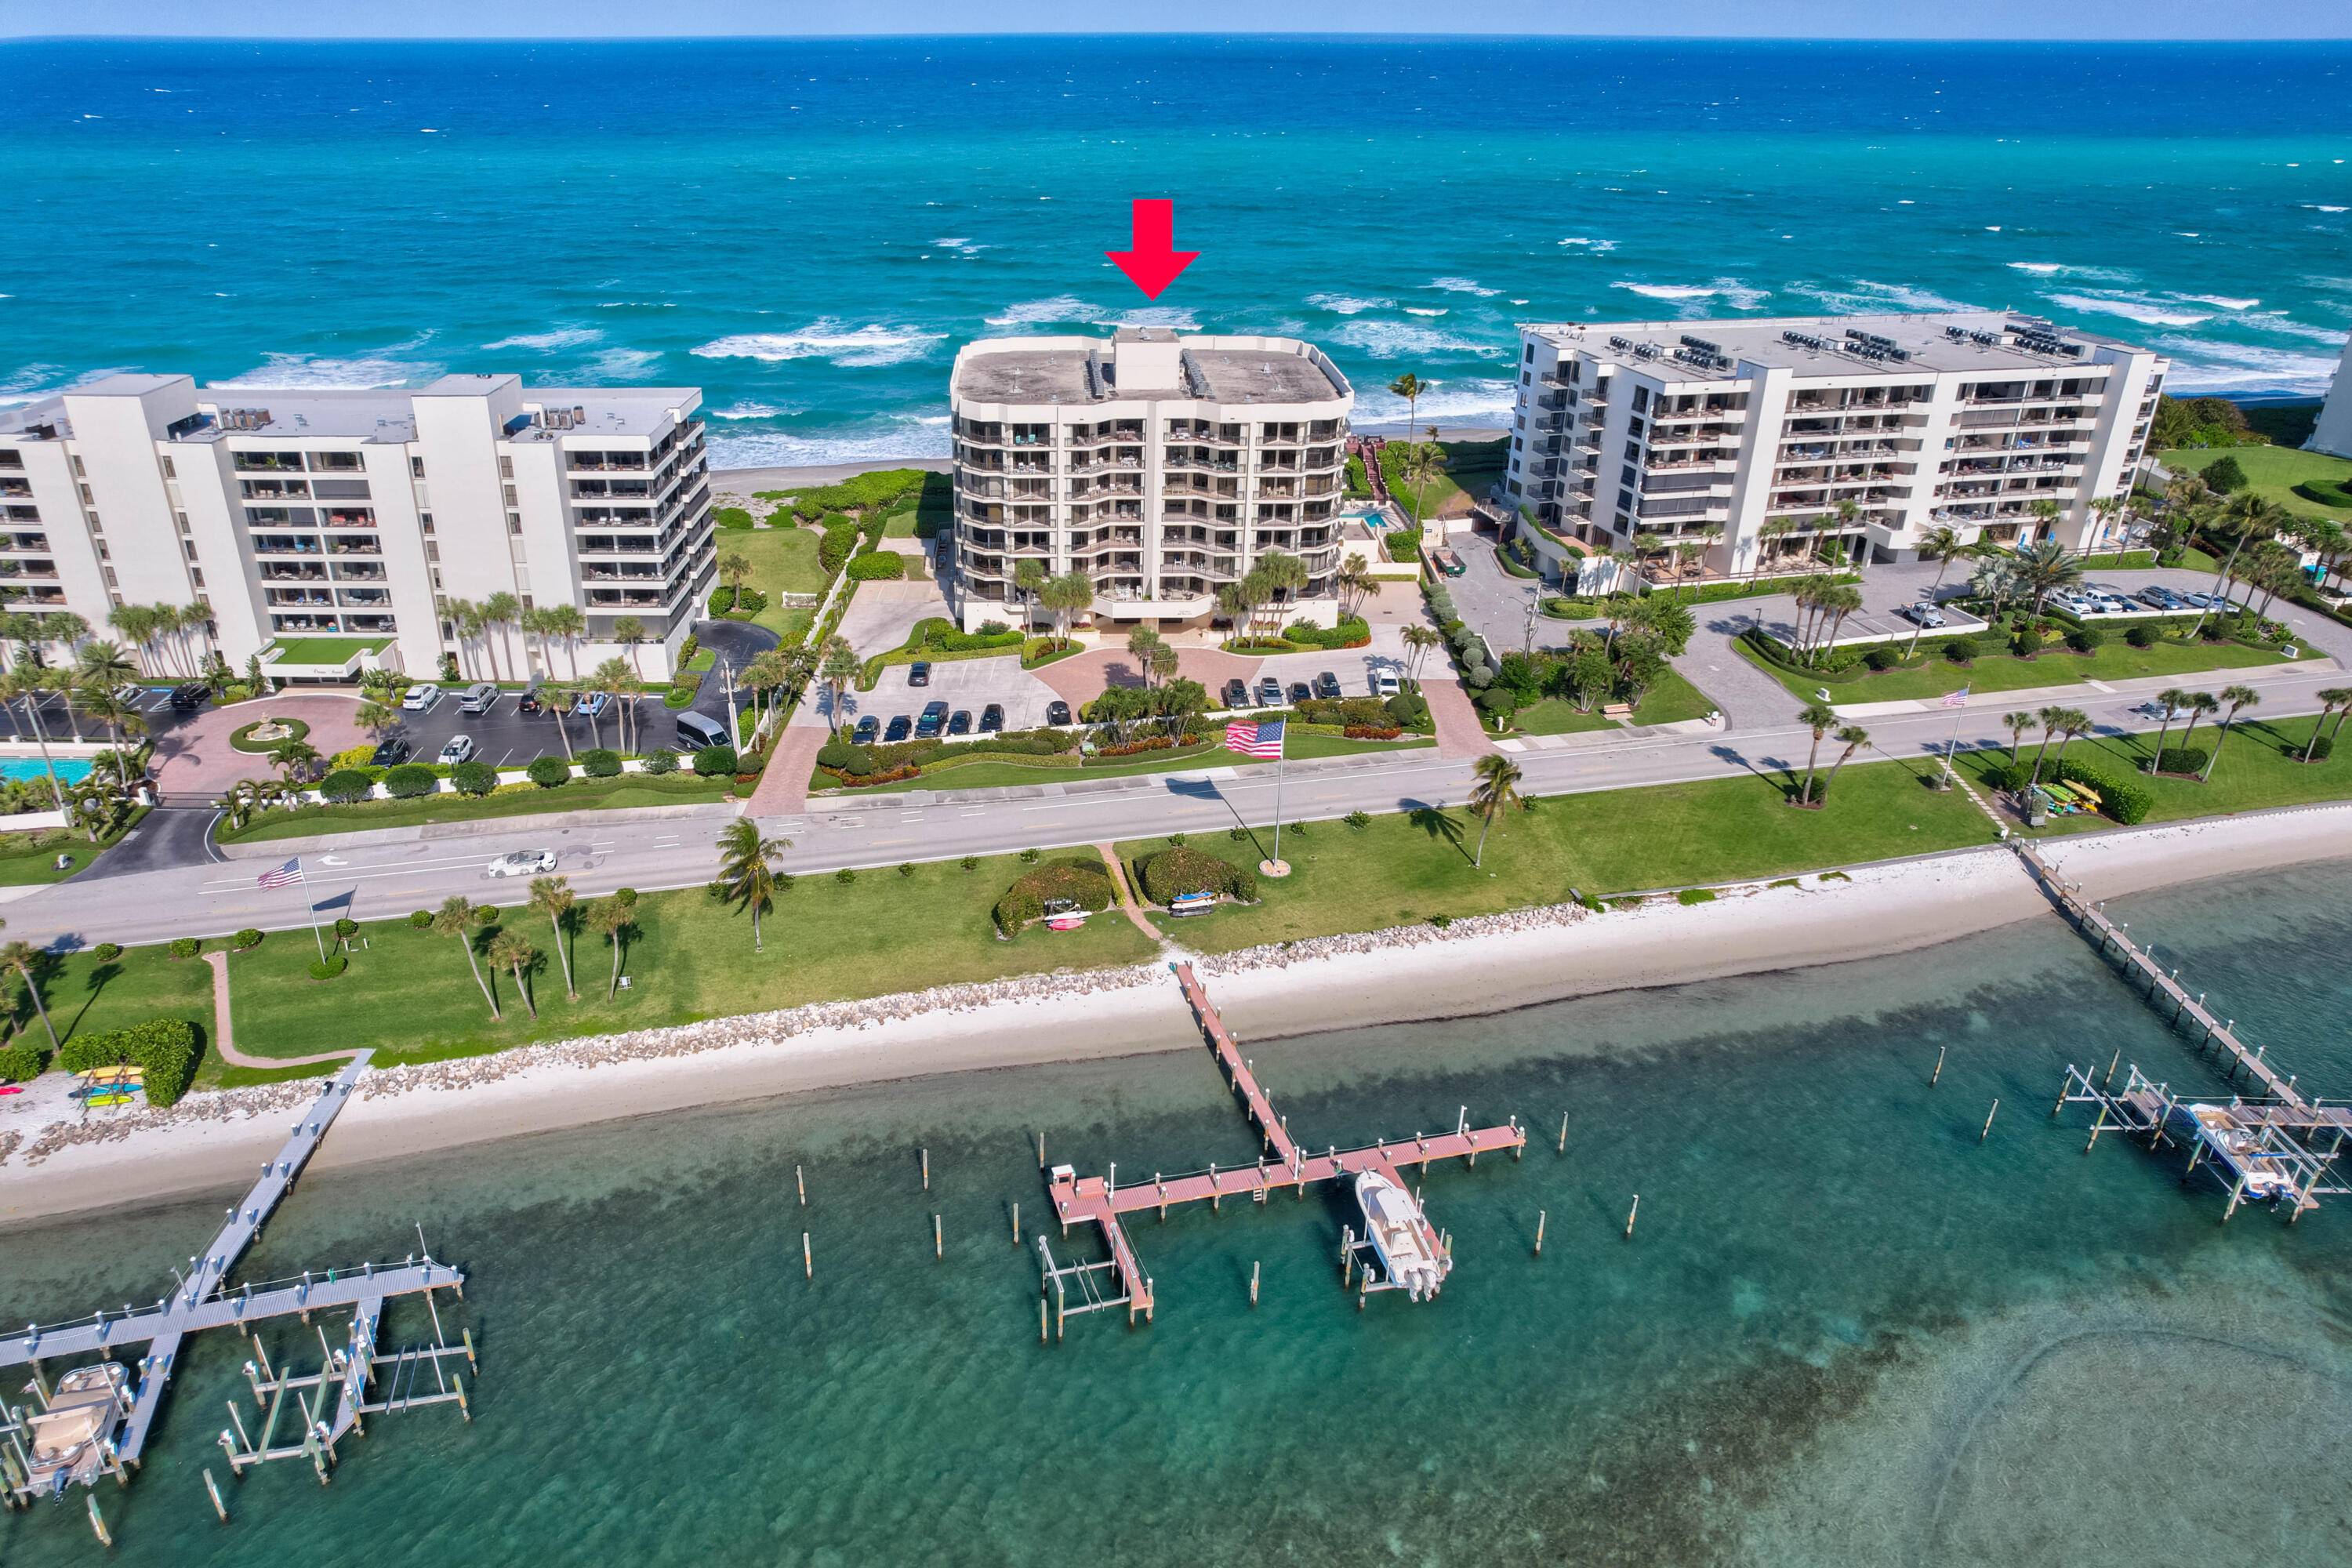 Enter the double entry doors to your exquisite Jupiter Island, beautifully renovated condo.